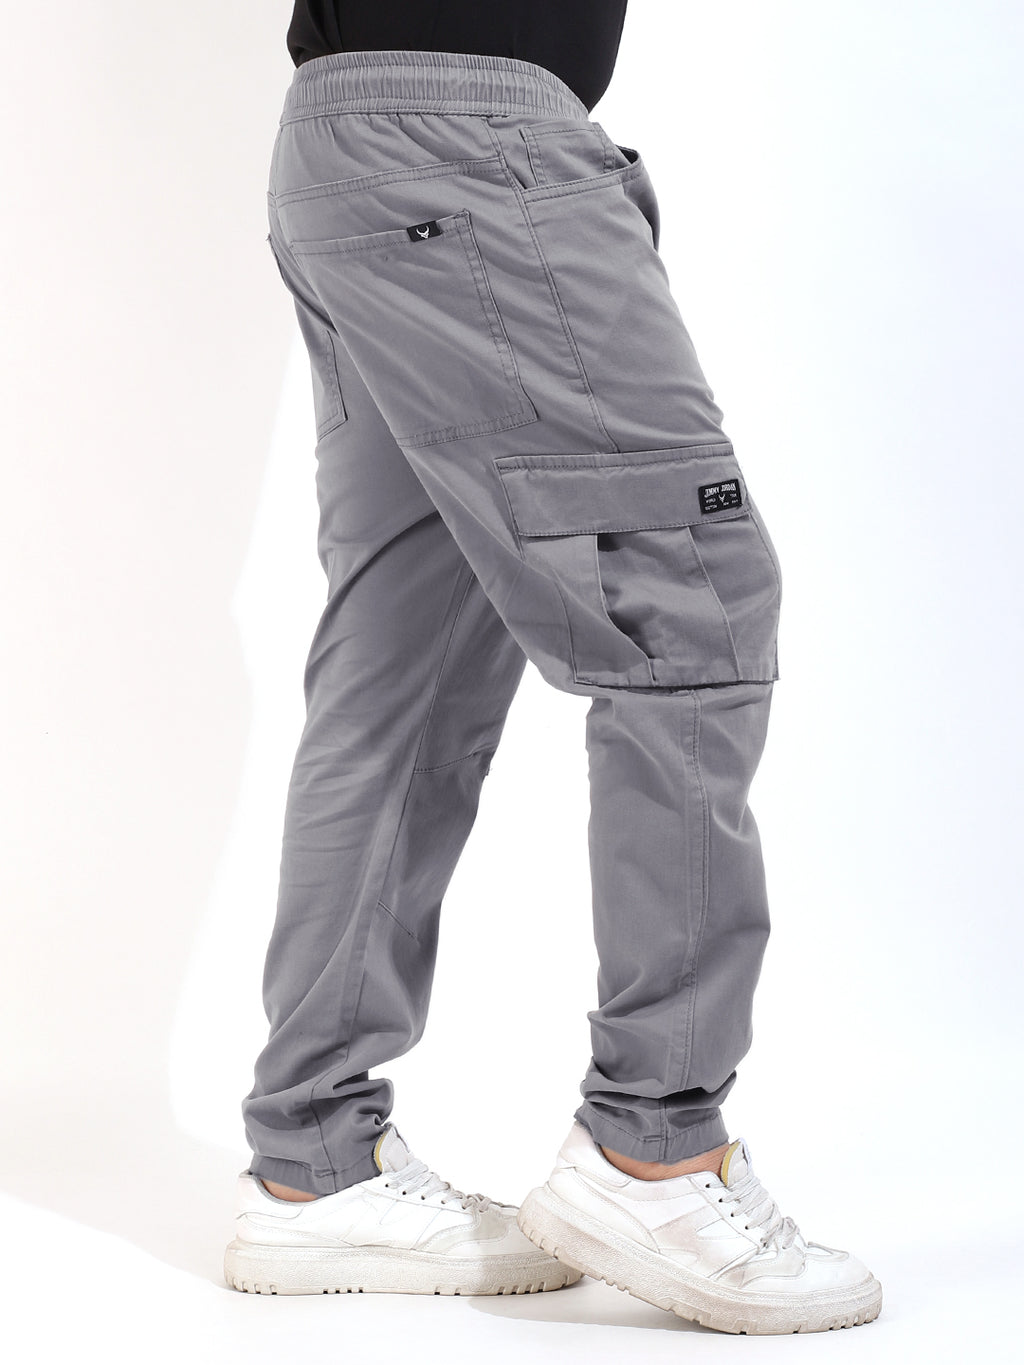 polycotton Industrial Work Wear Cargo Pants, Gray at Rs 950/piece in Mumbai